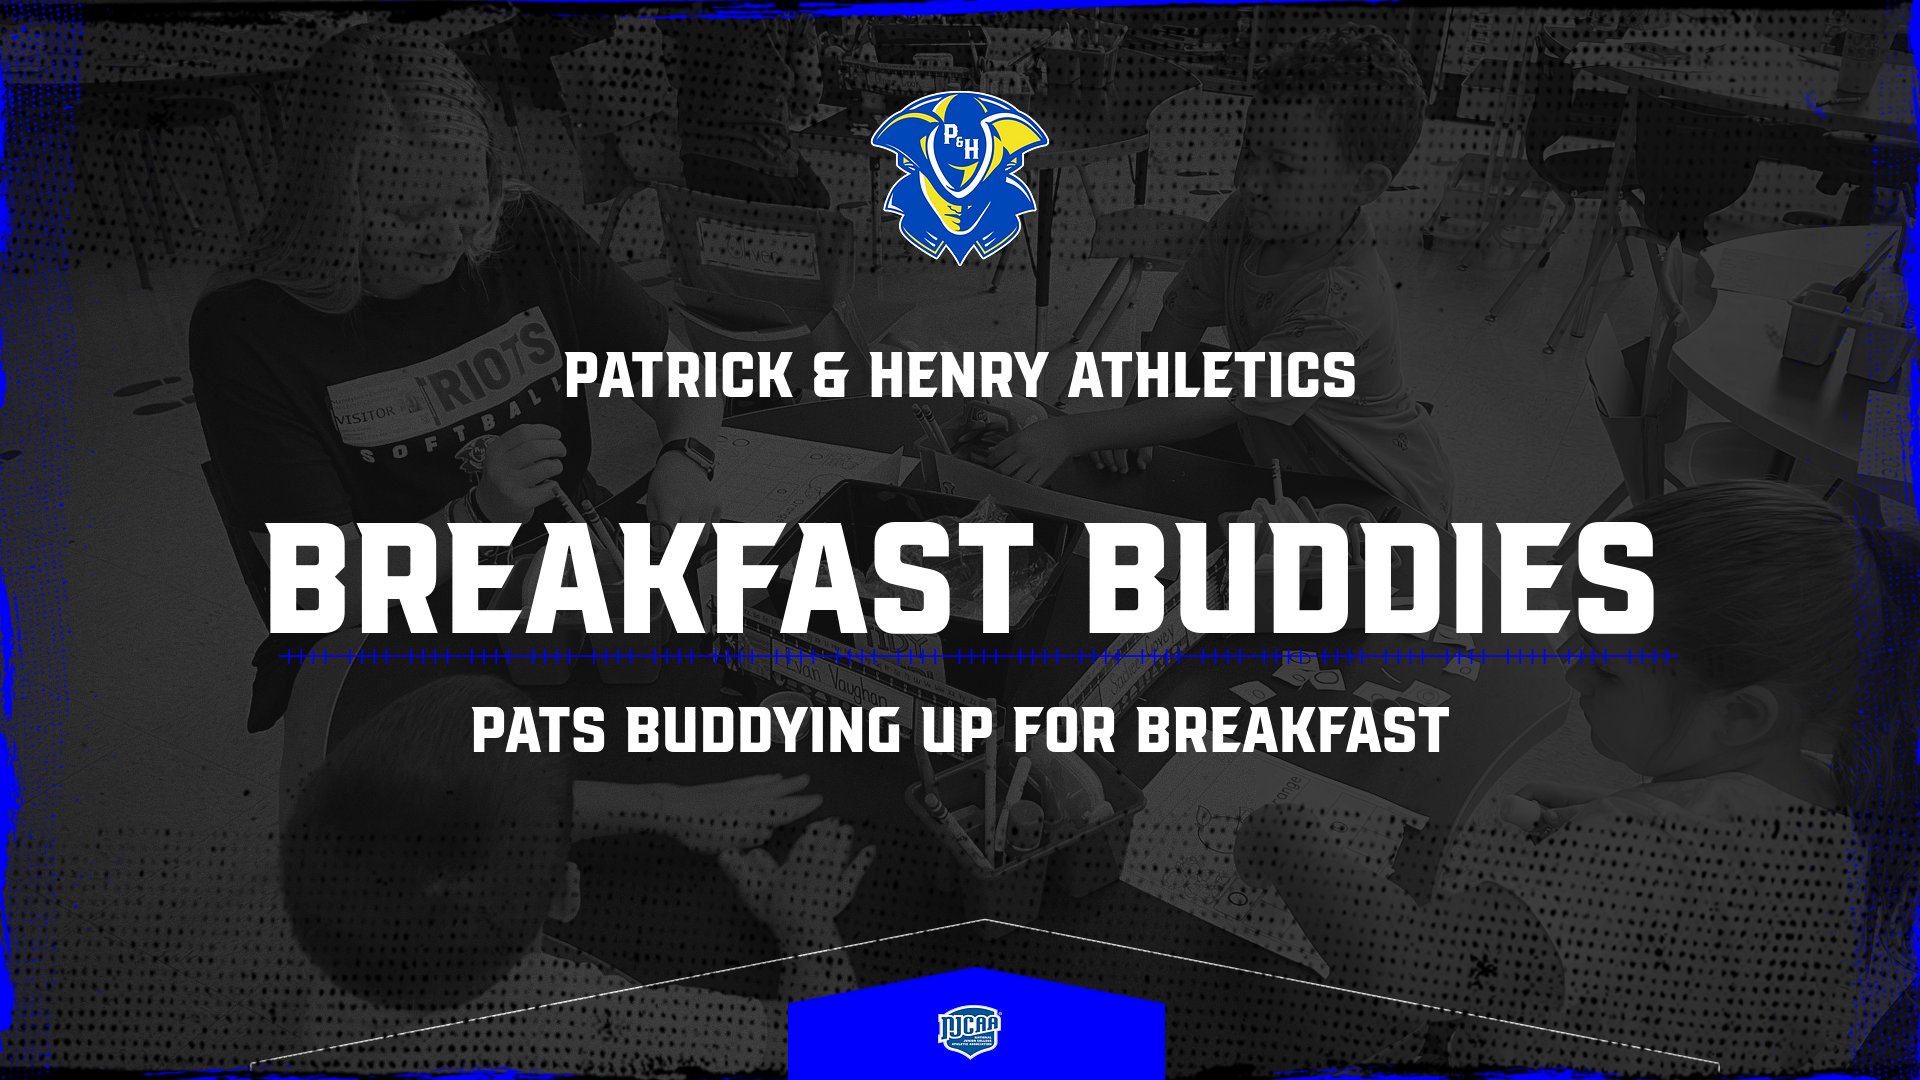 P&HCC Athletes are Buddying Up for Breakfast